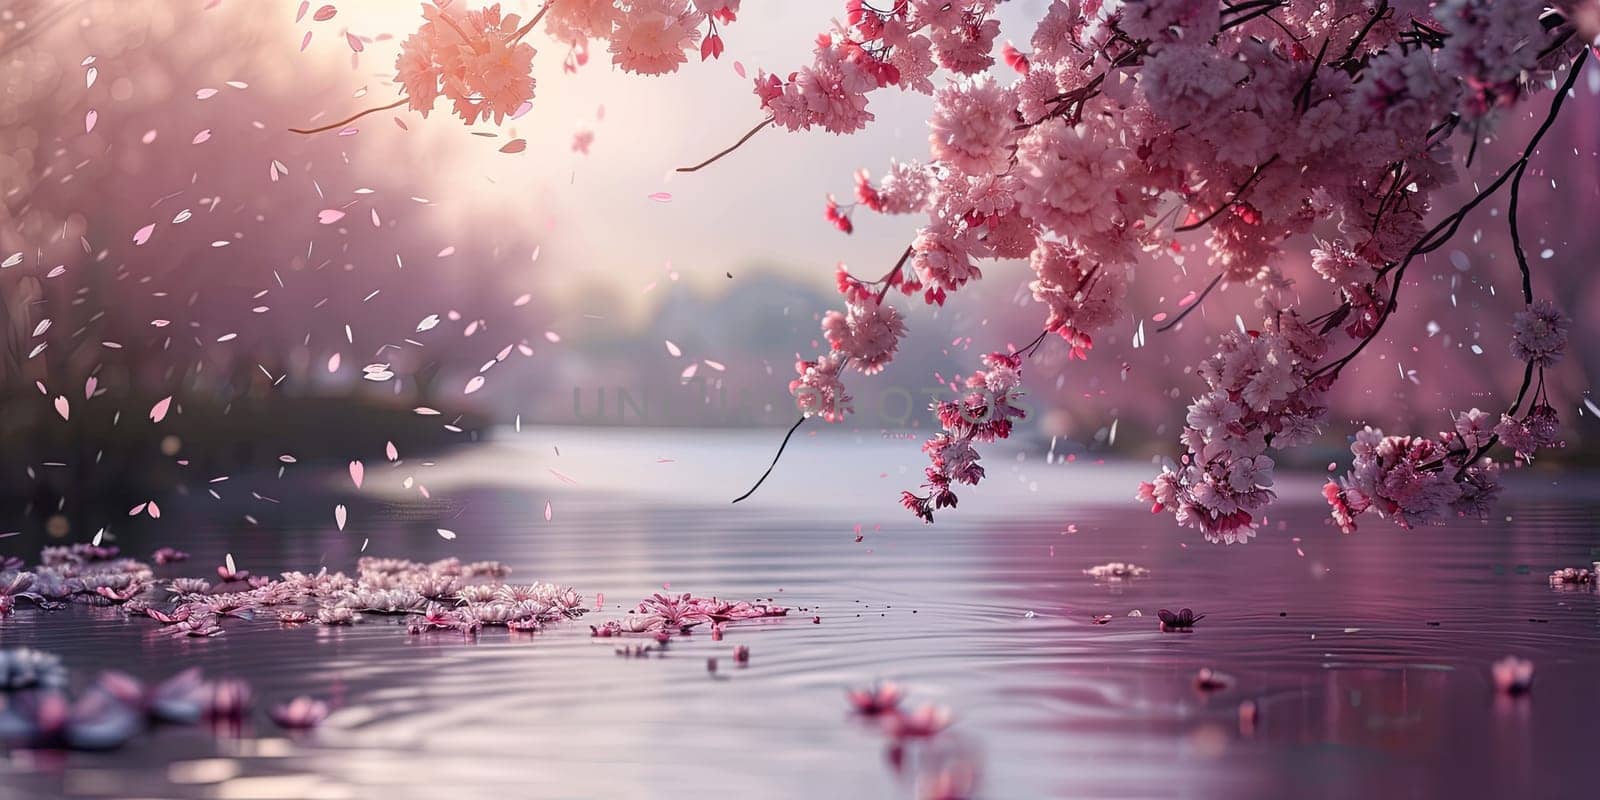 Cherry blossom branches over water, with bright pink flowers and petals falling into water in lake. Seasonal sakura blossom. Ai generation. by Lunnica